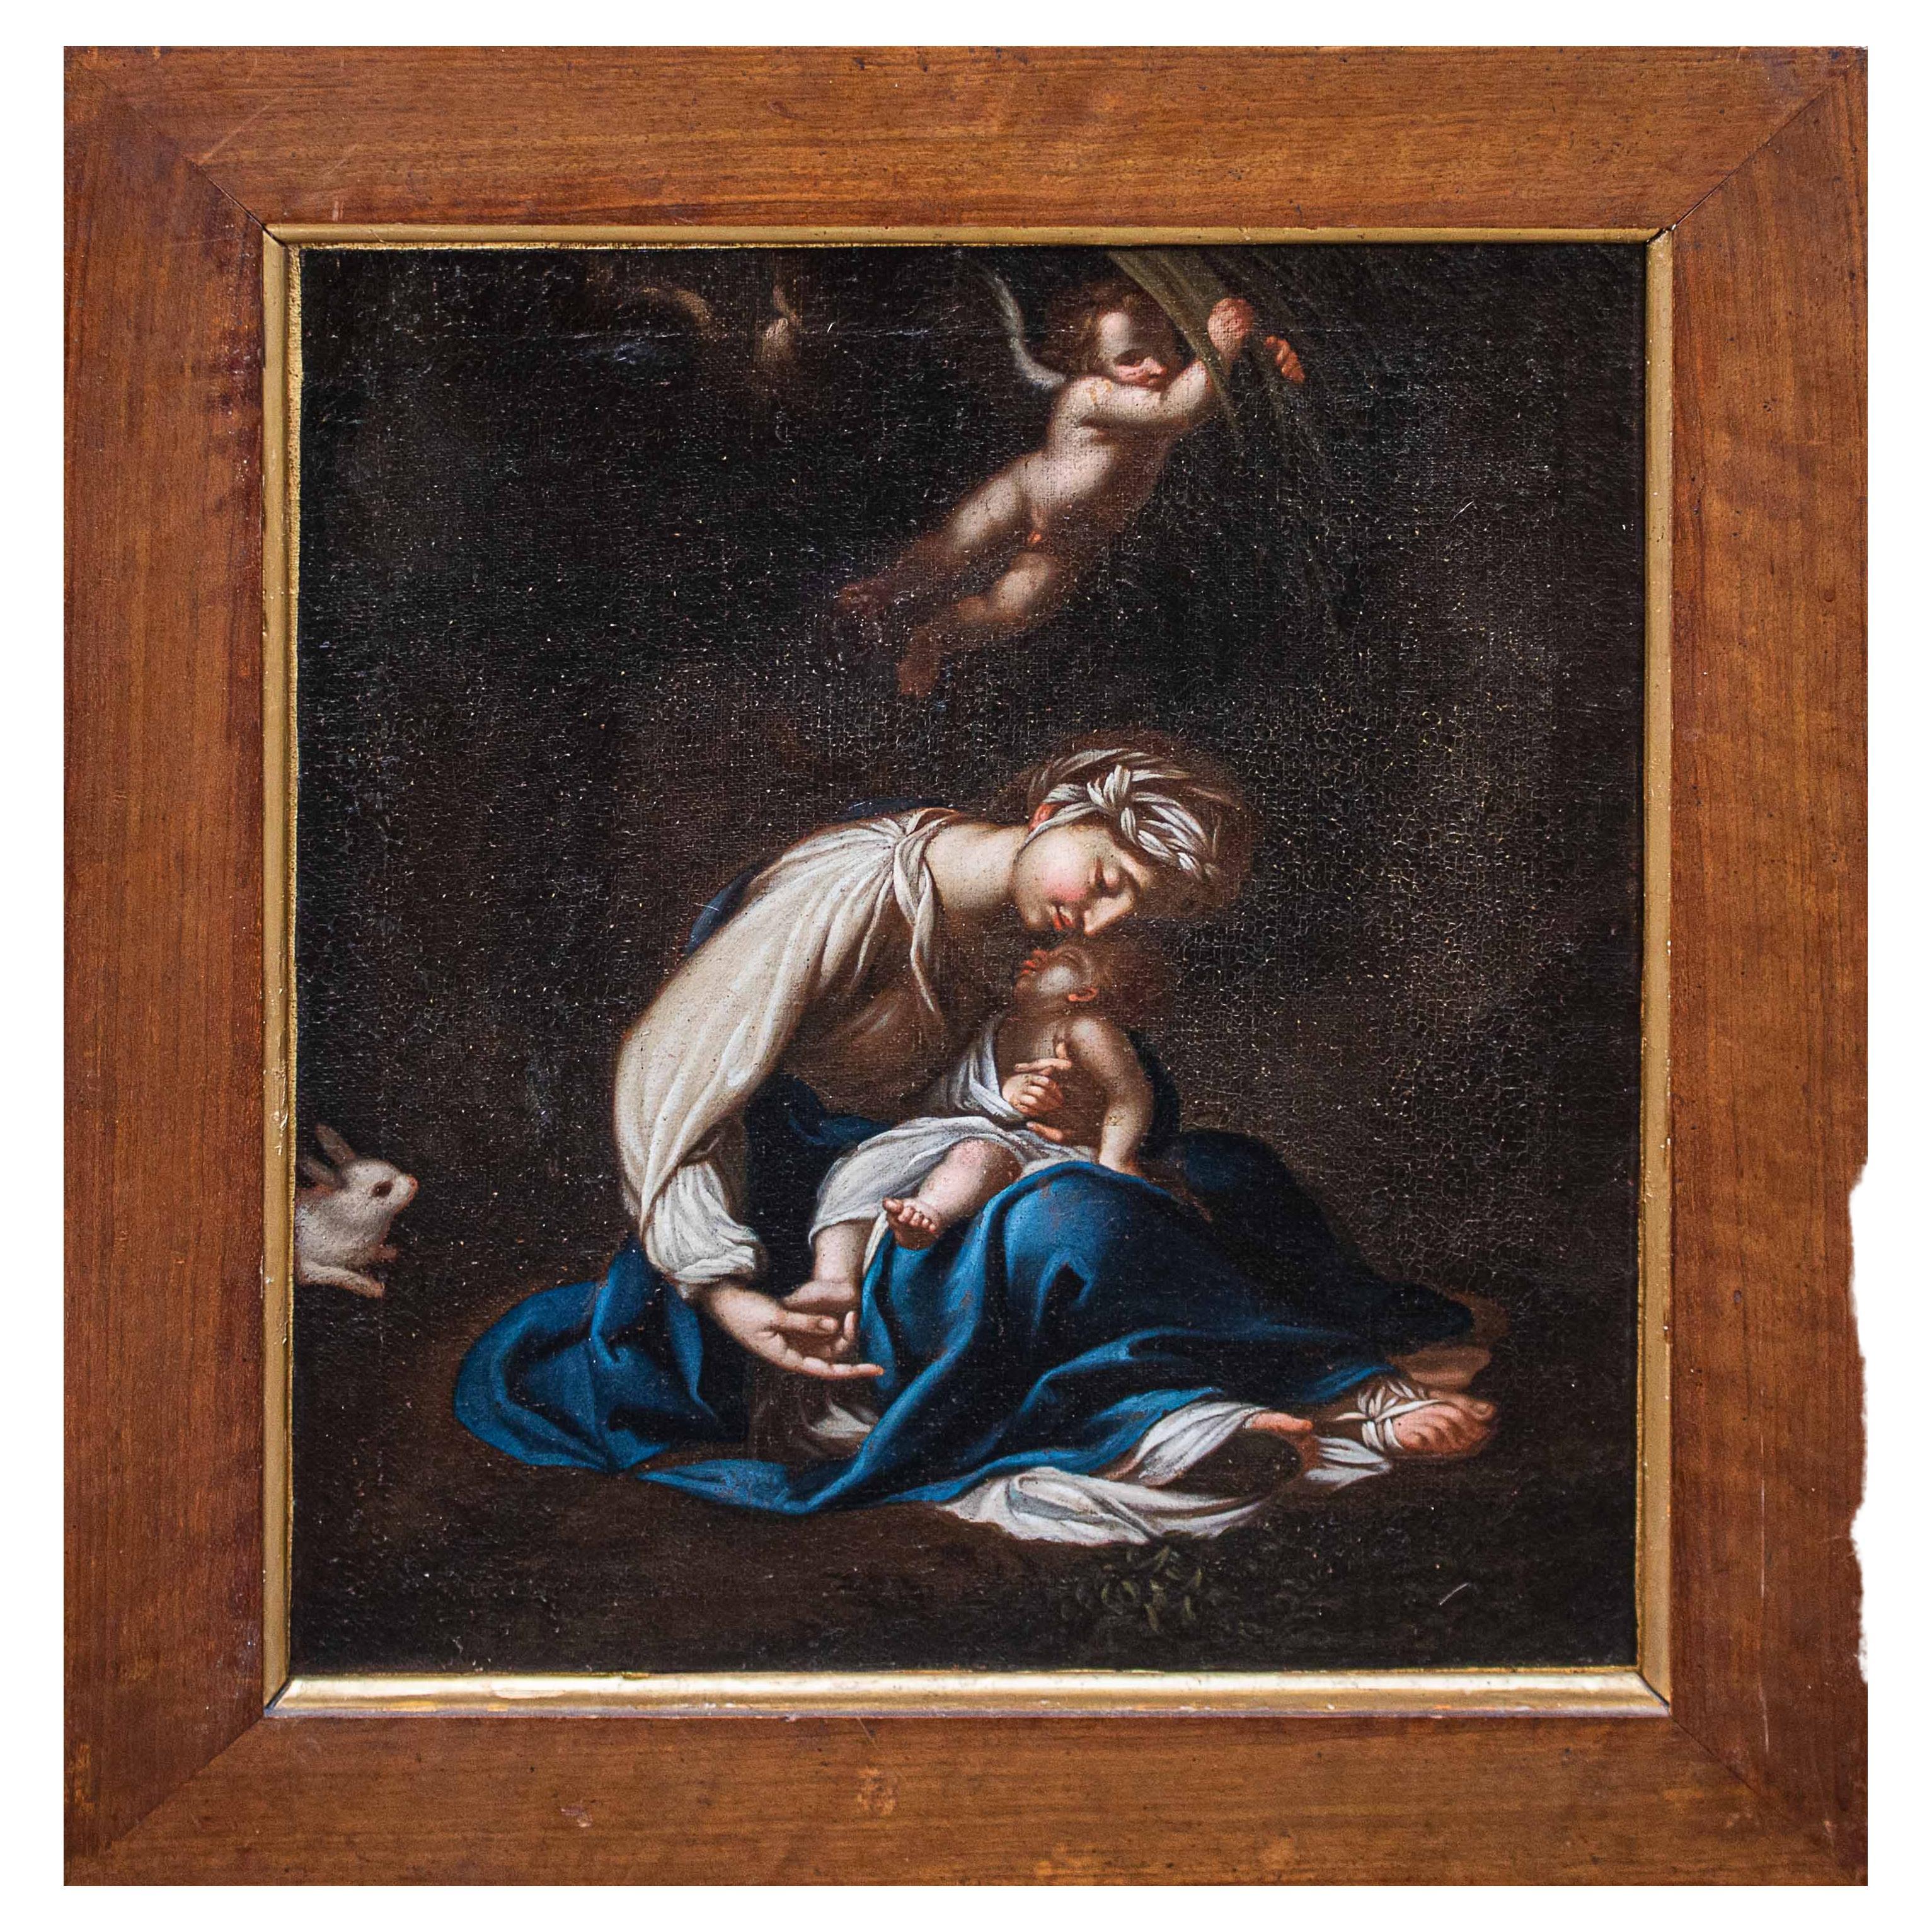 16th Century Madonna with Child Painting Oil on Canvas by Follower of Correggio